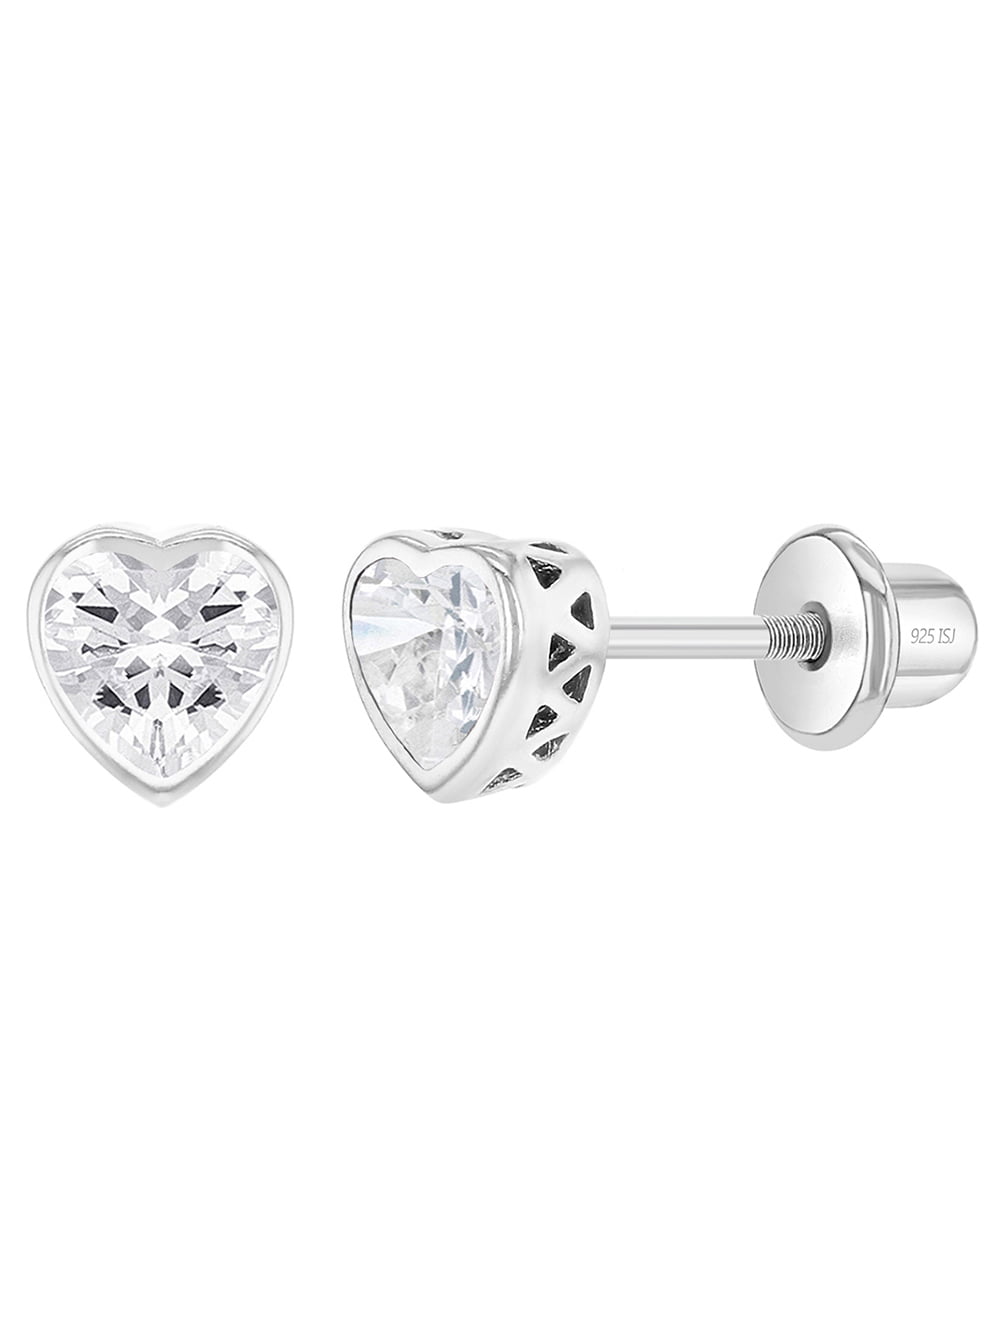 Details about   .925 Sterling Silver Preciosca Crystal October Stone Heart Child's Studs Madi K 